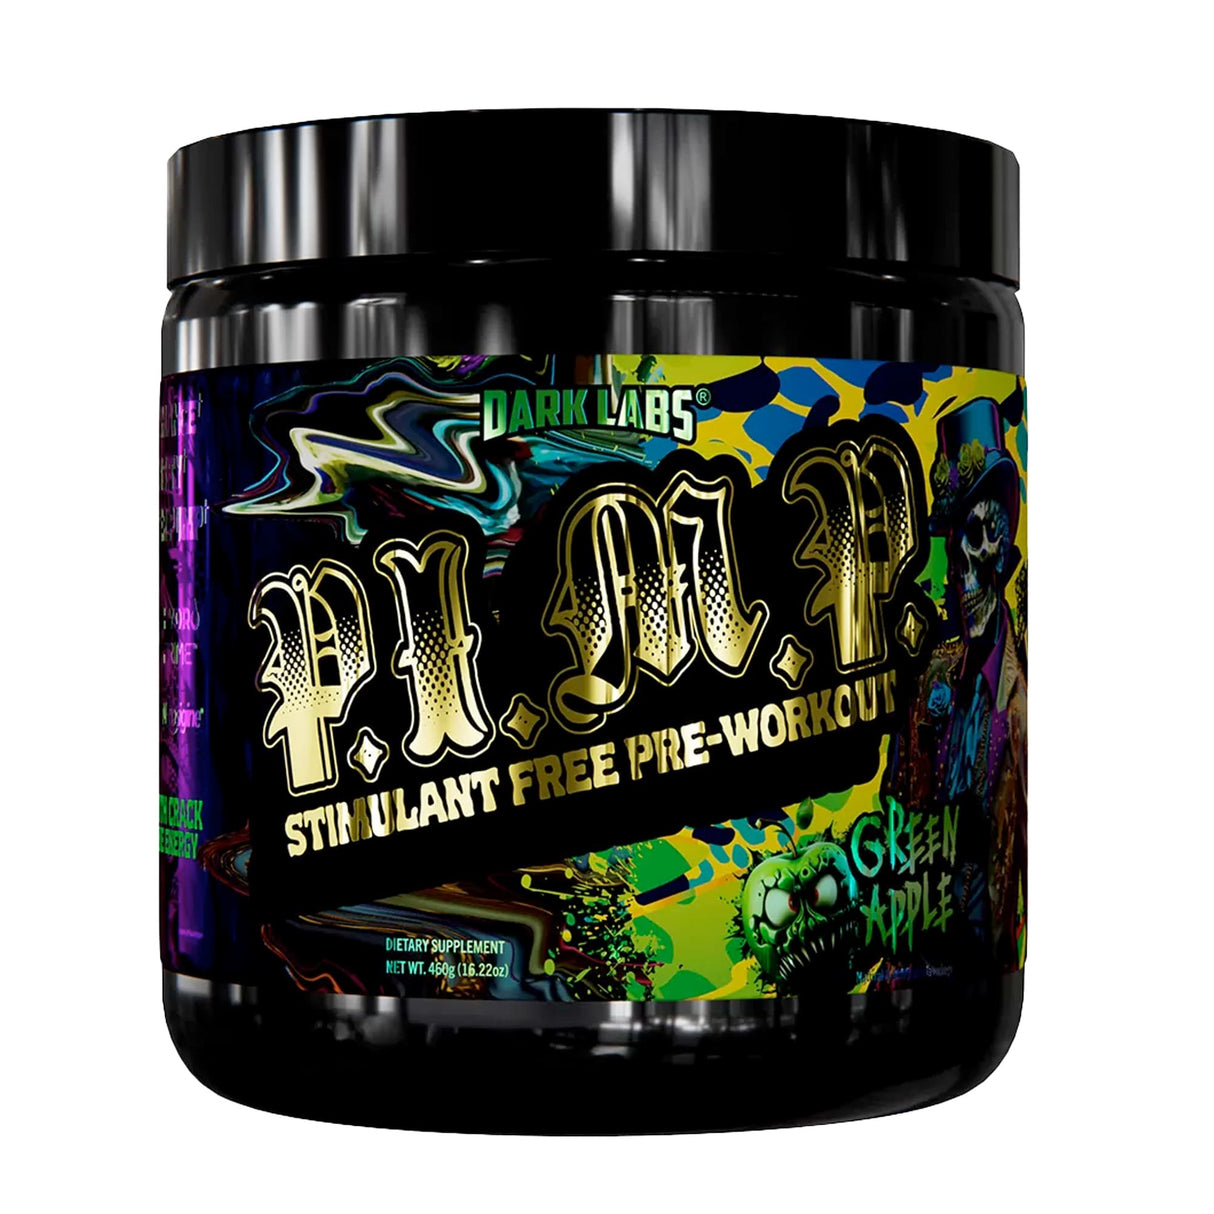 P.I.M.P. Stimulant Free Pre-Workout by Dark Labs - Muscle Factory SC